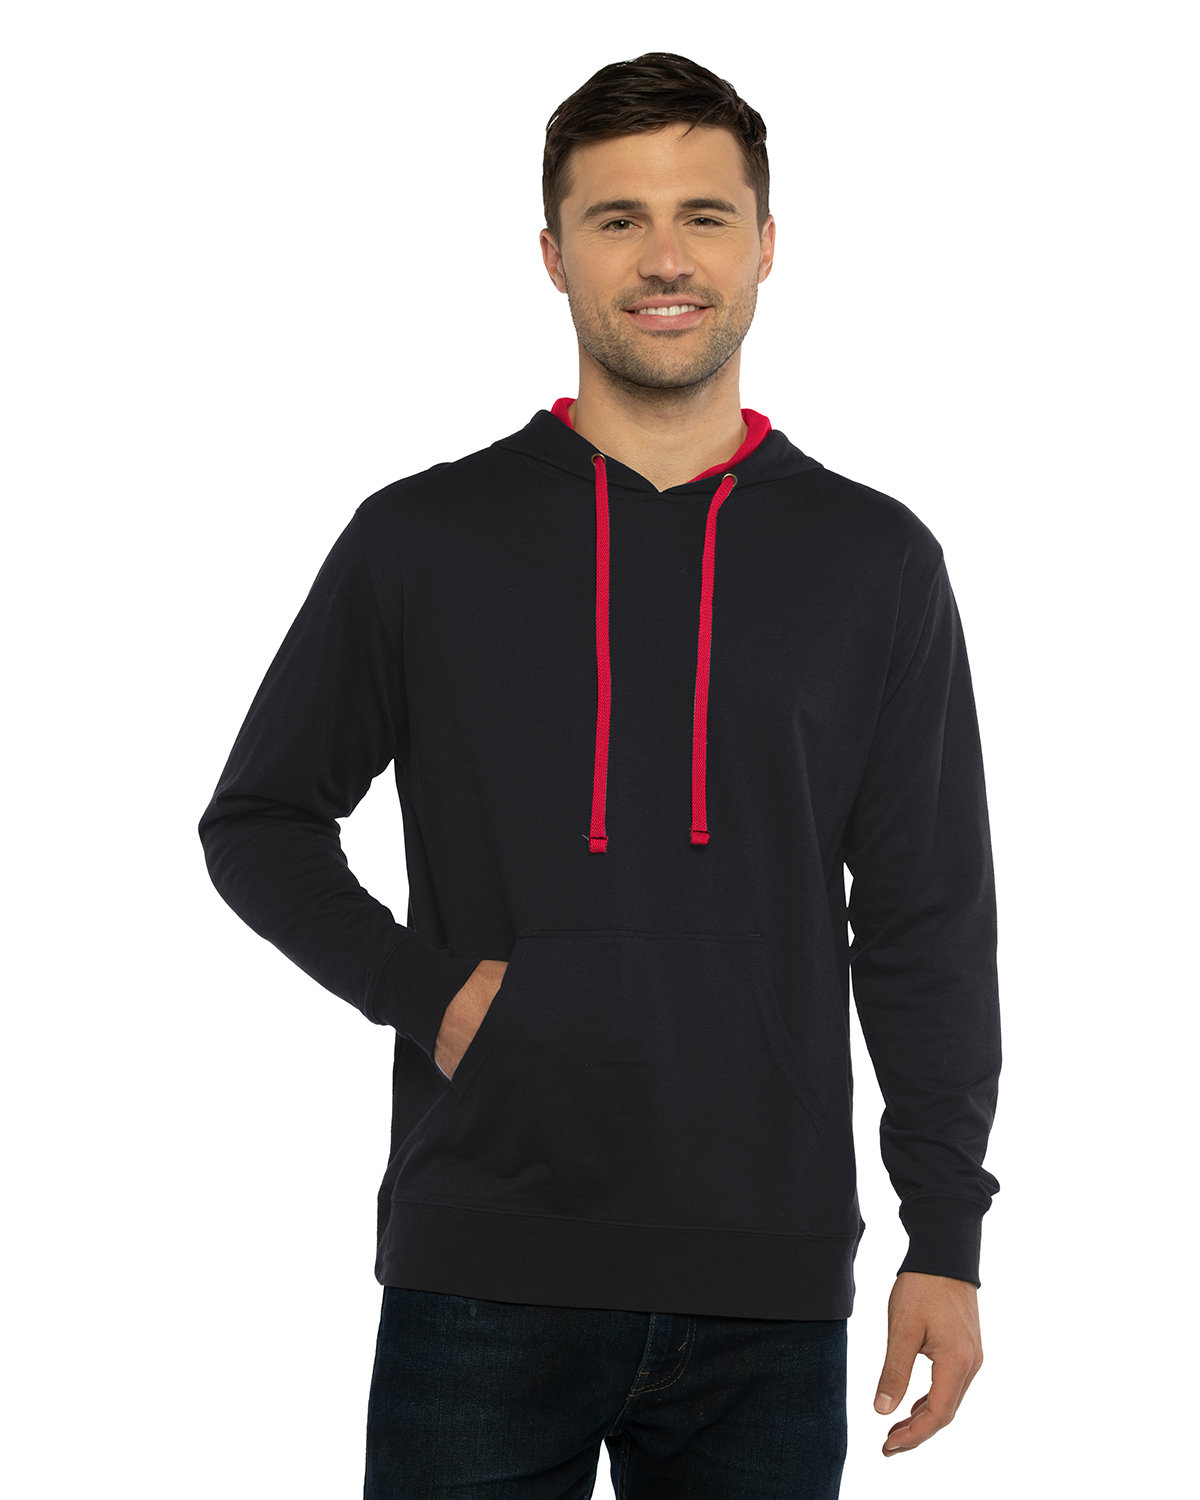 Next Level Apparel Unisex Laguna French Terry Pullover Hooded Sweatshirt BLACK/ RED 